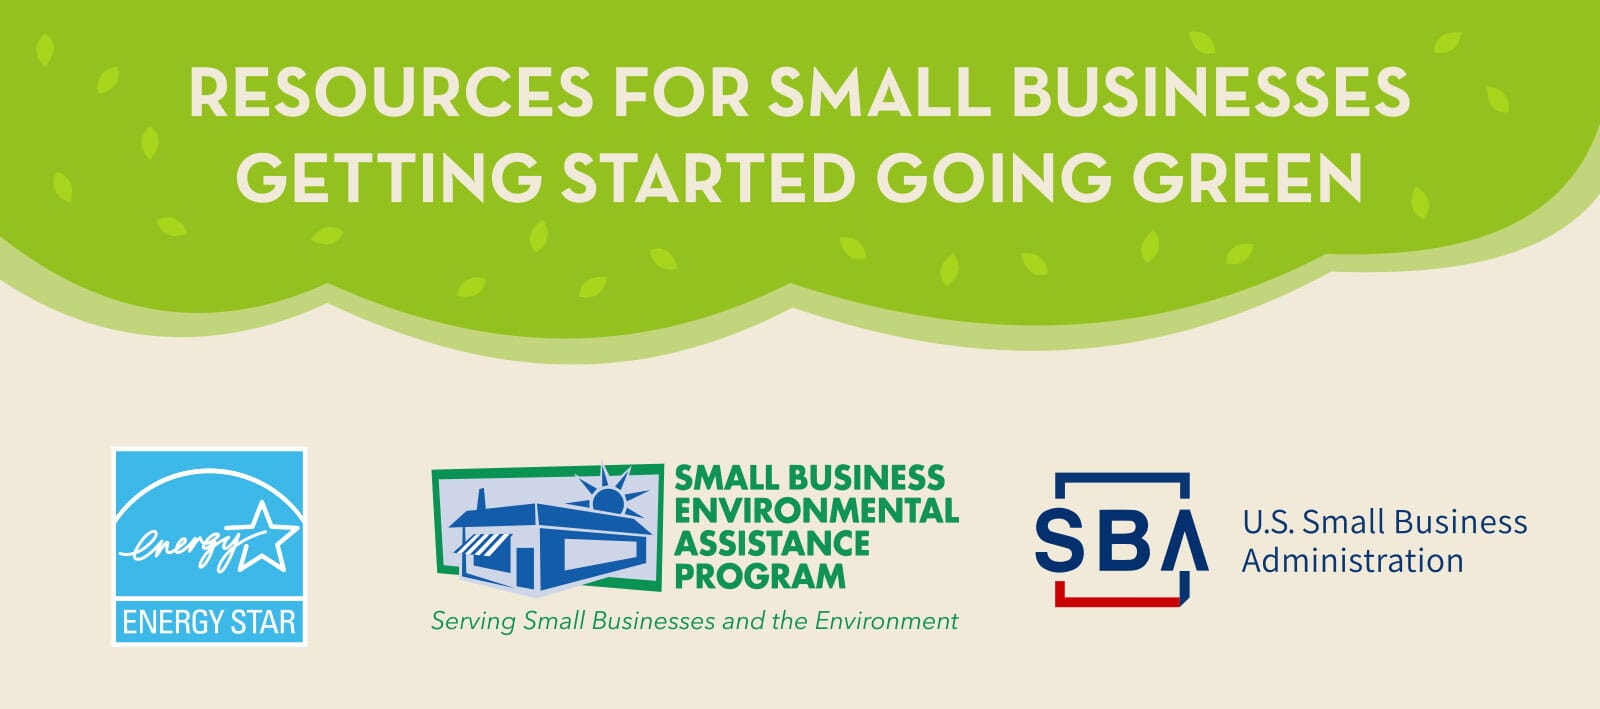 Green Business Resources Infographic